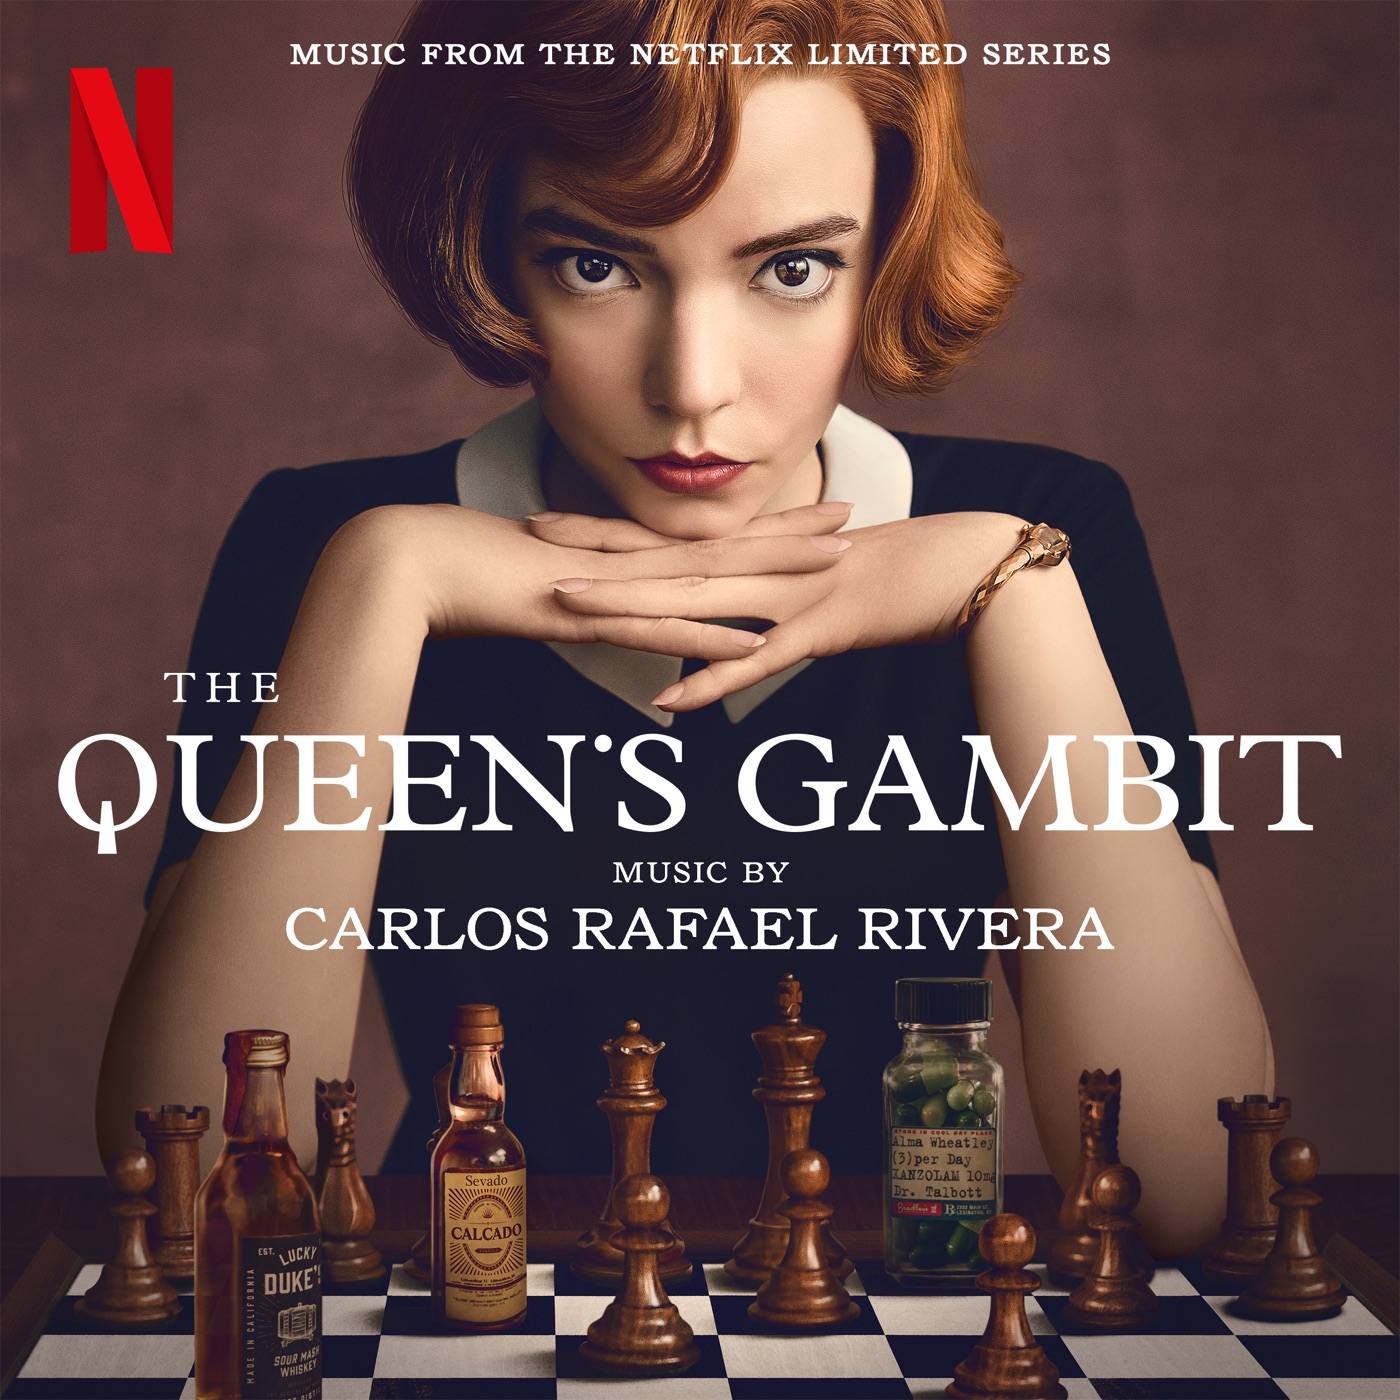 The Queen's Gambit (Music from the Netflix Limited Series) by Carlos Rafael Rivera